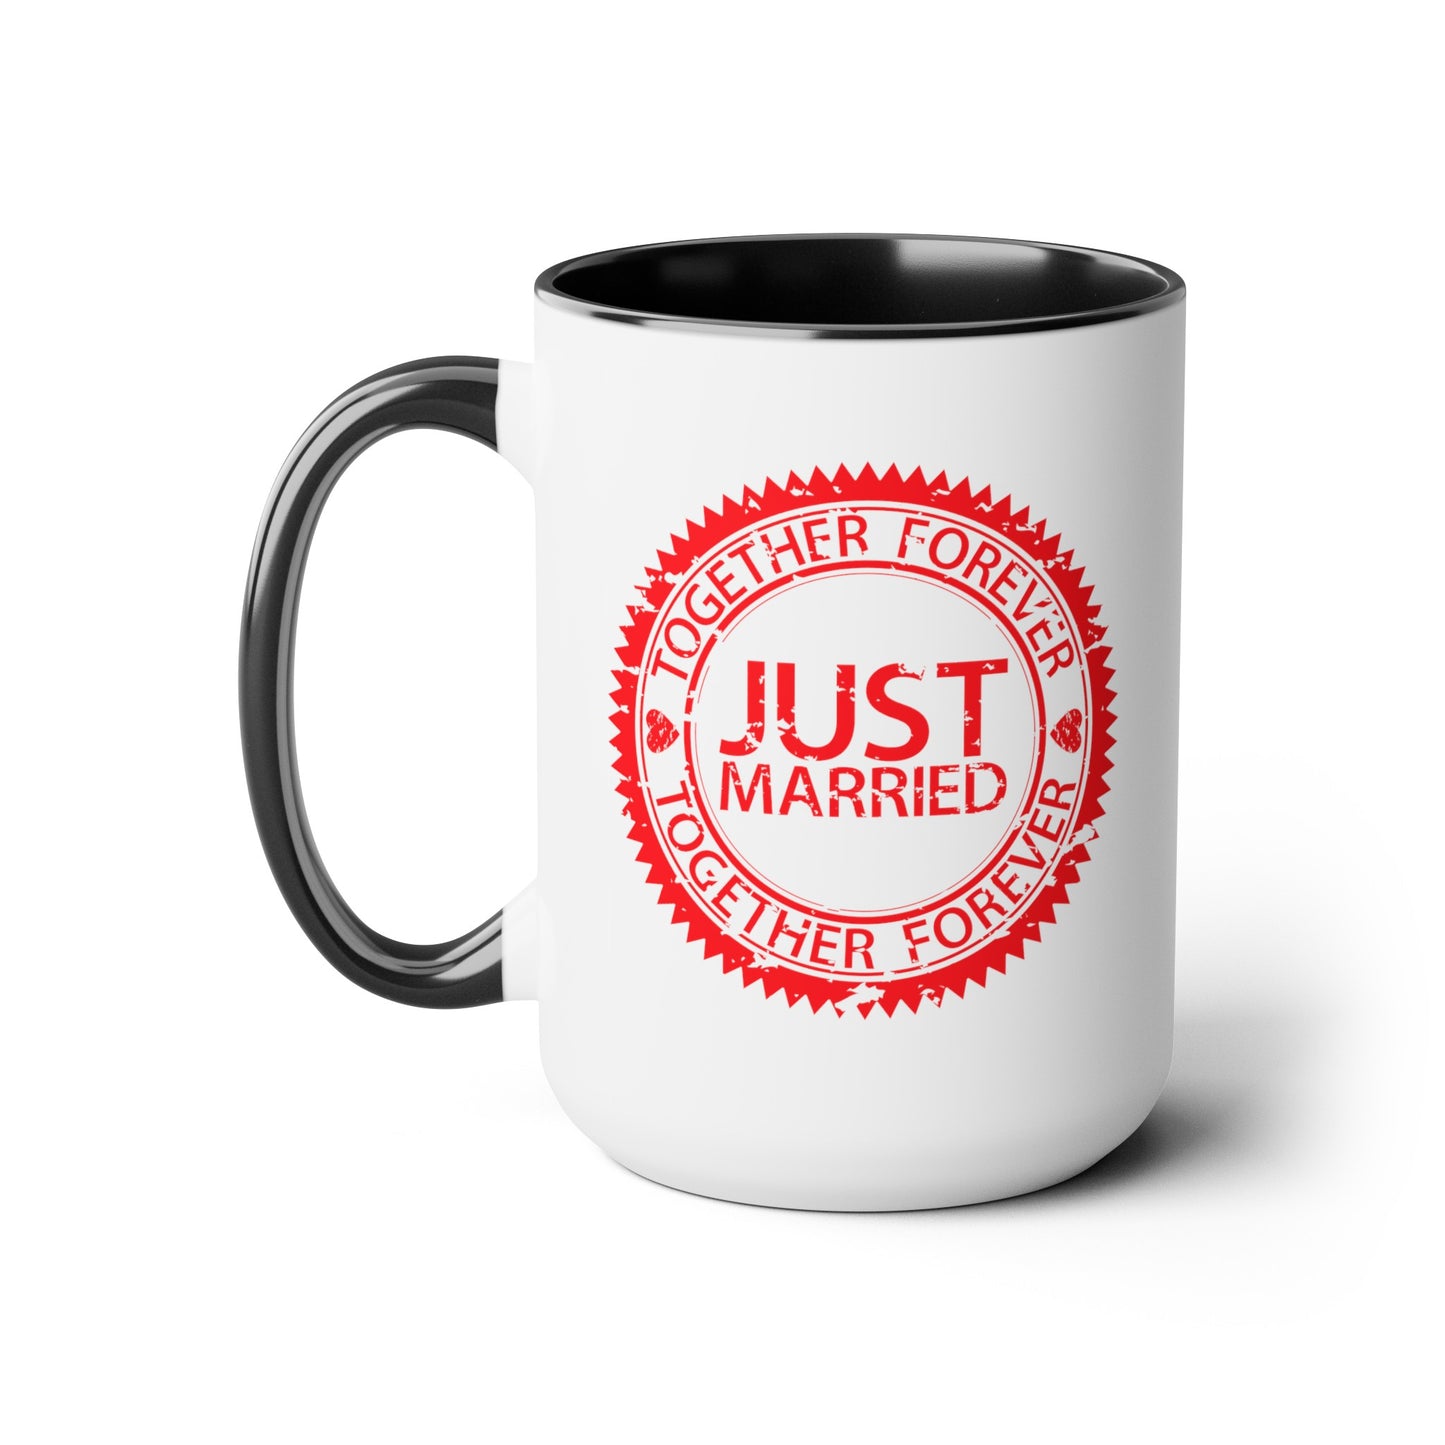 Just Married Coffee Mugs - Double Sided Black Accent White Ceramic 15oz by TheGlassyLass.com